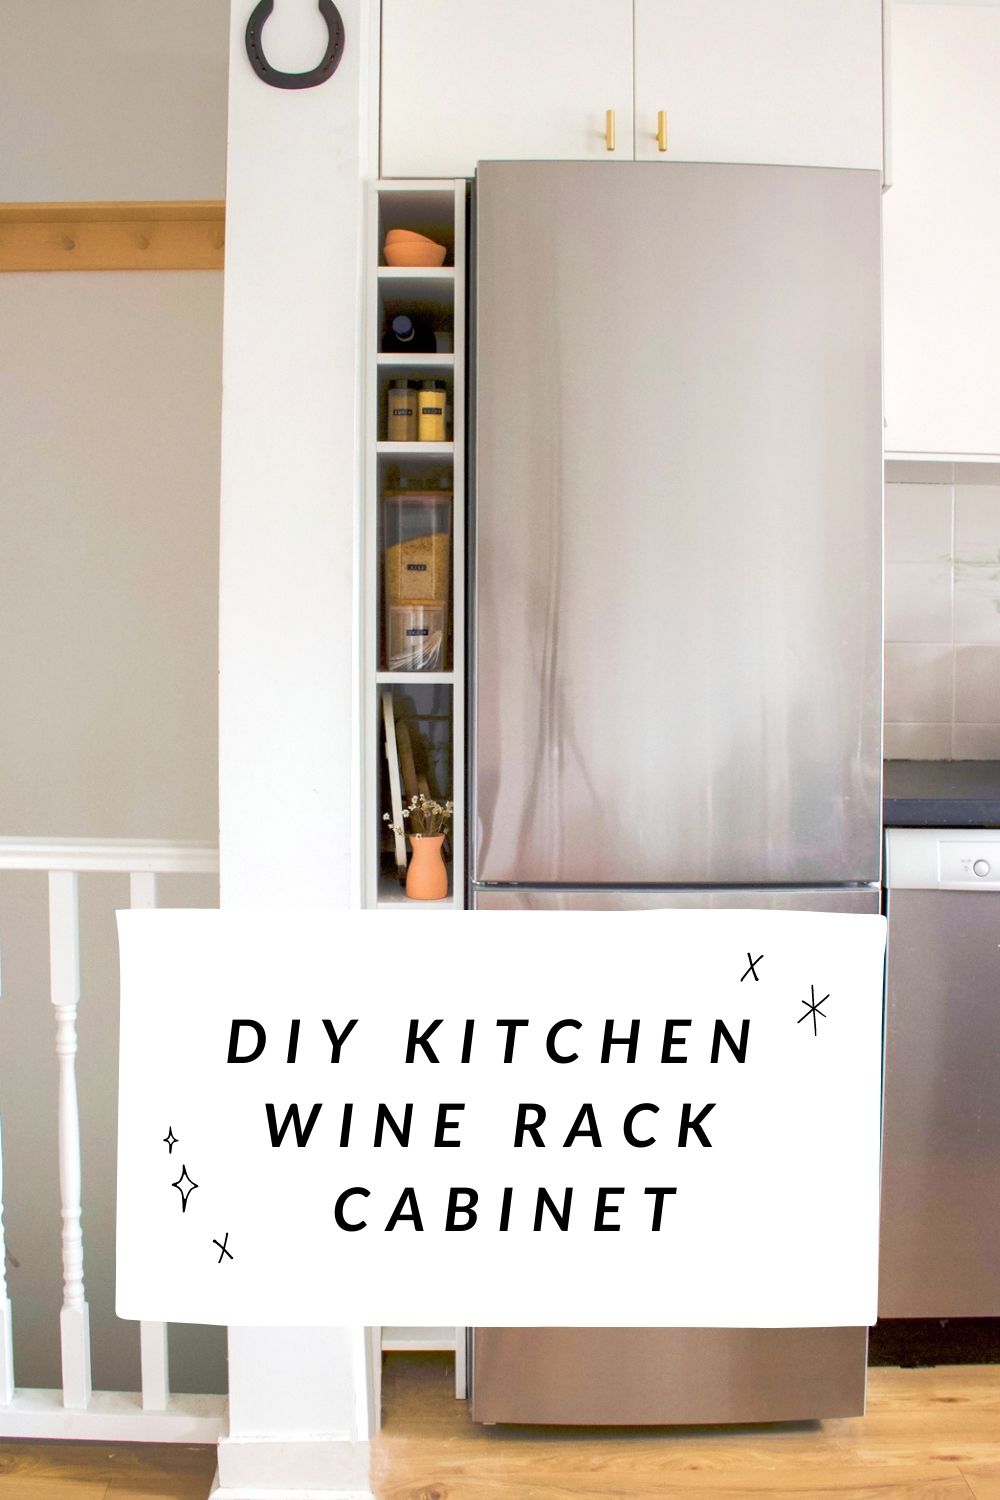 A step-by-step tutorial for building a DIY kitchen wine rack cabinet for storing wine, cookbooks and more!